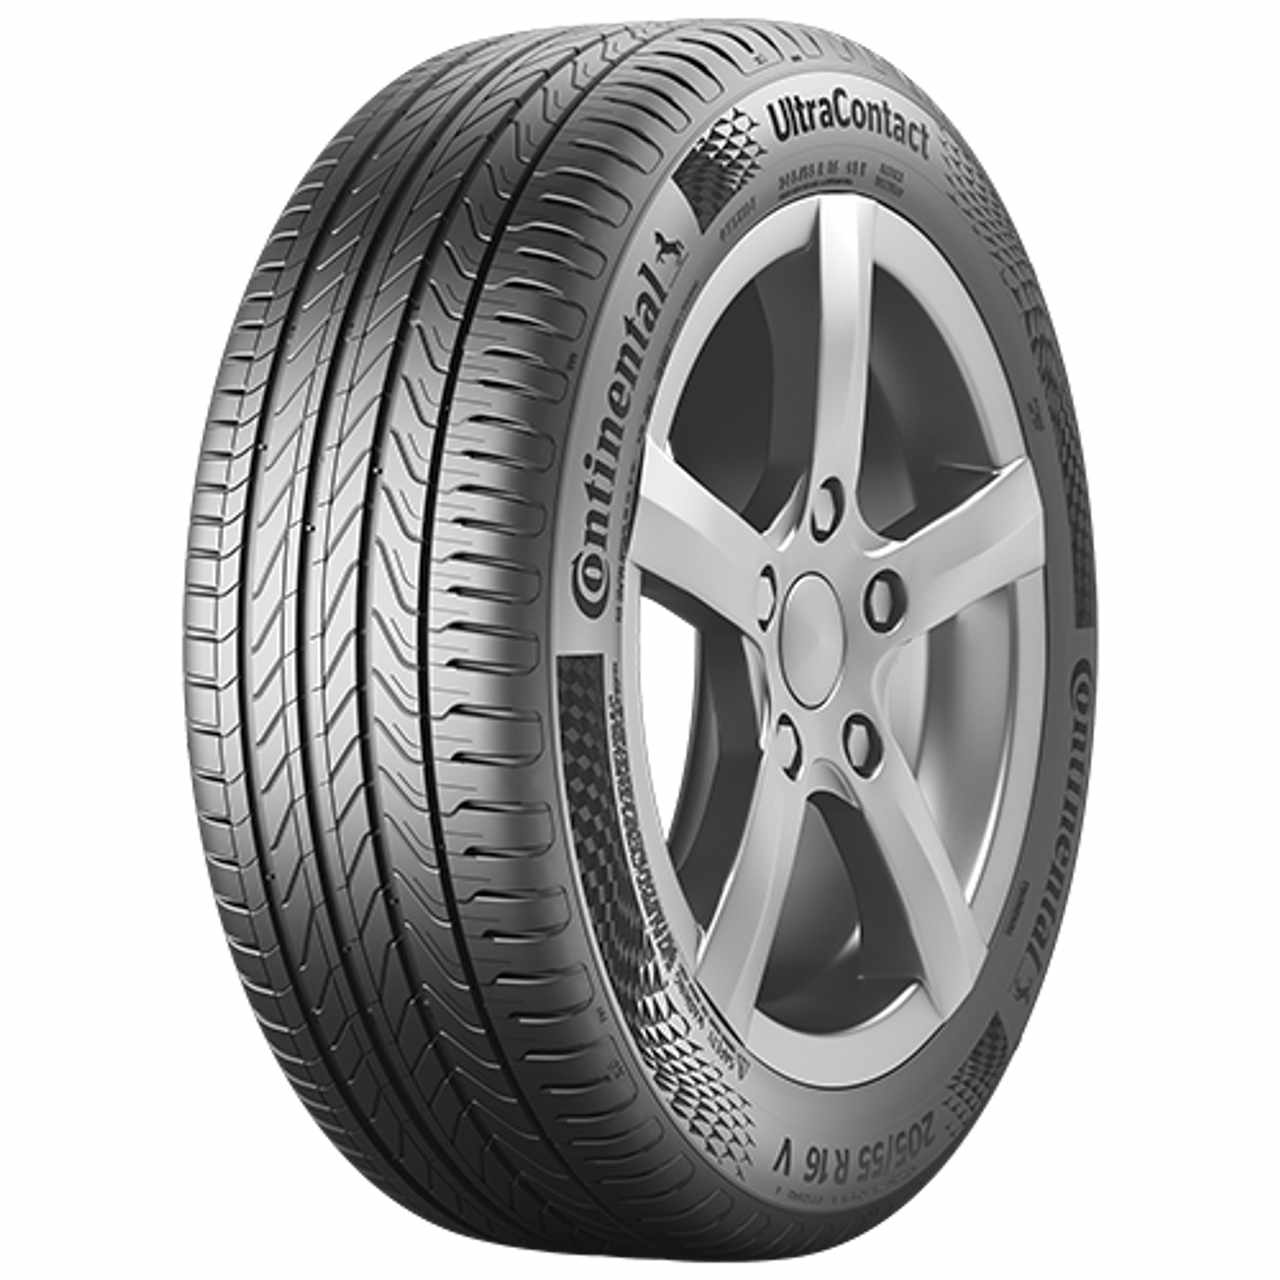 CONTINENTAL ULTRACONTACT (EVc) 205/60R15 91V BSW von Continental